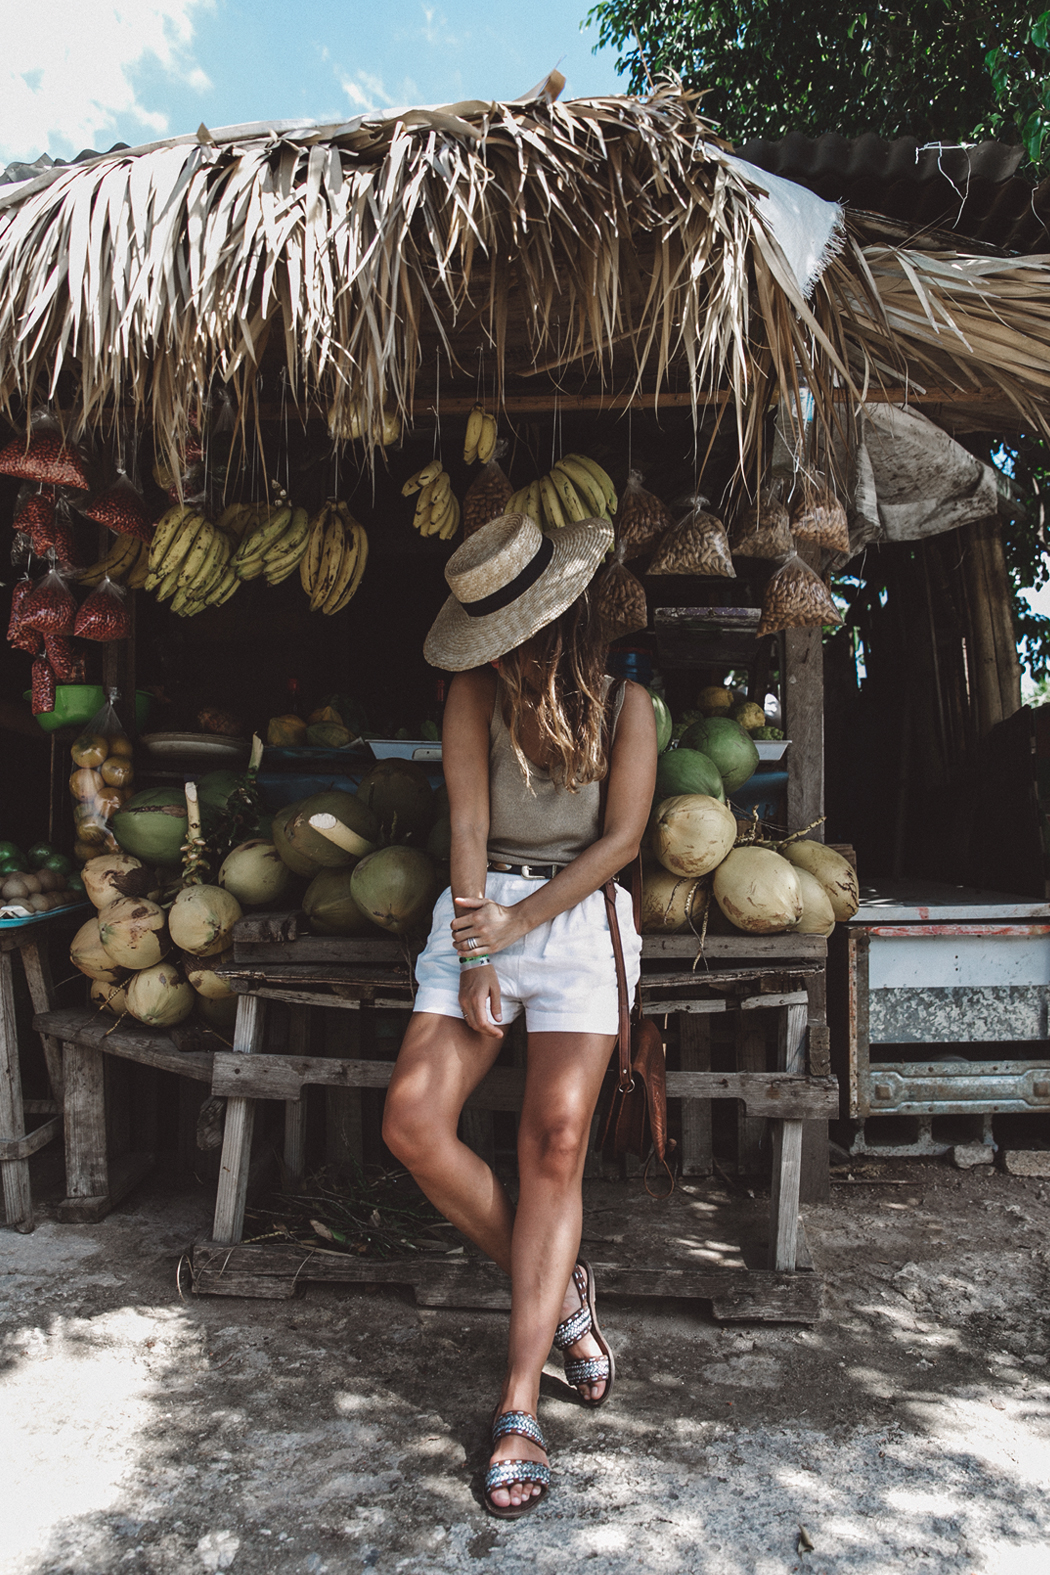 Jamaica-Collage_On_The_Road-Straw_Hat-Golden_Top-White_Shorts-Maje_Sandals-Fruits_Stands-Outfit-Summer_Look-Street_Style-5